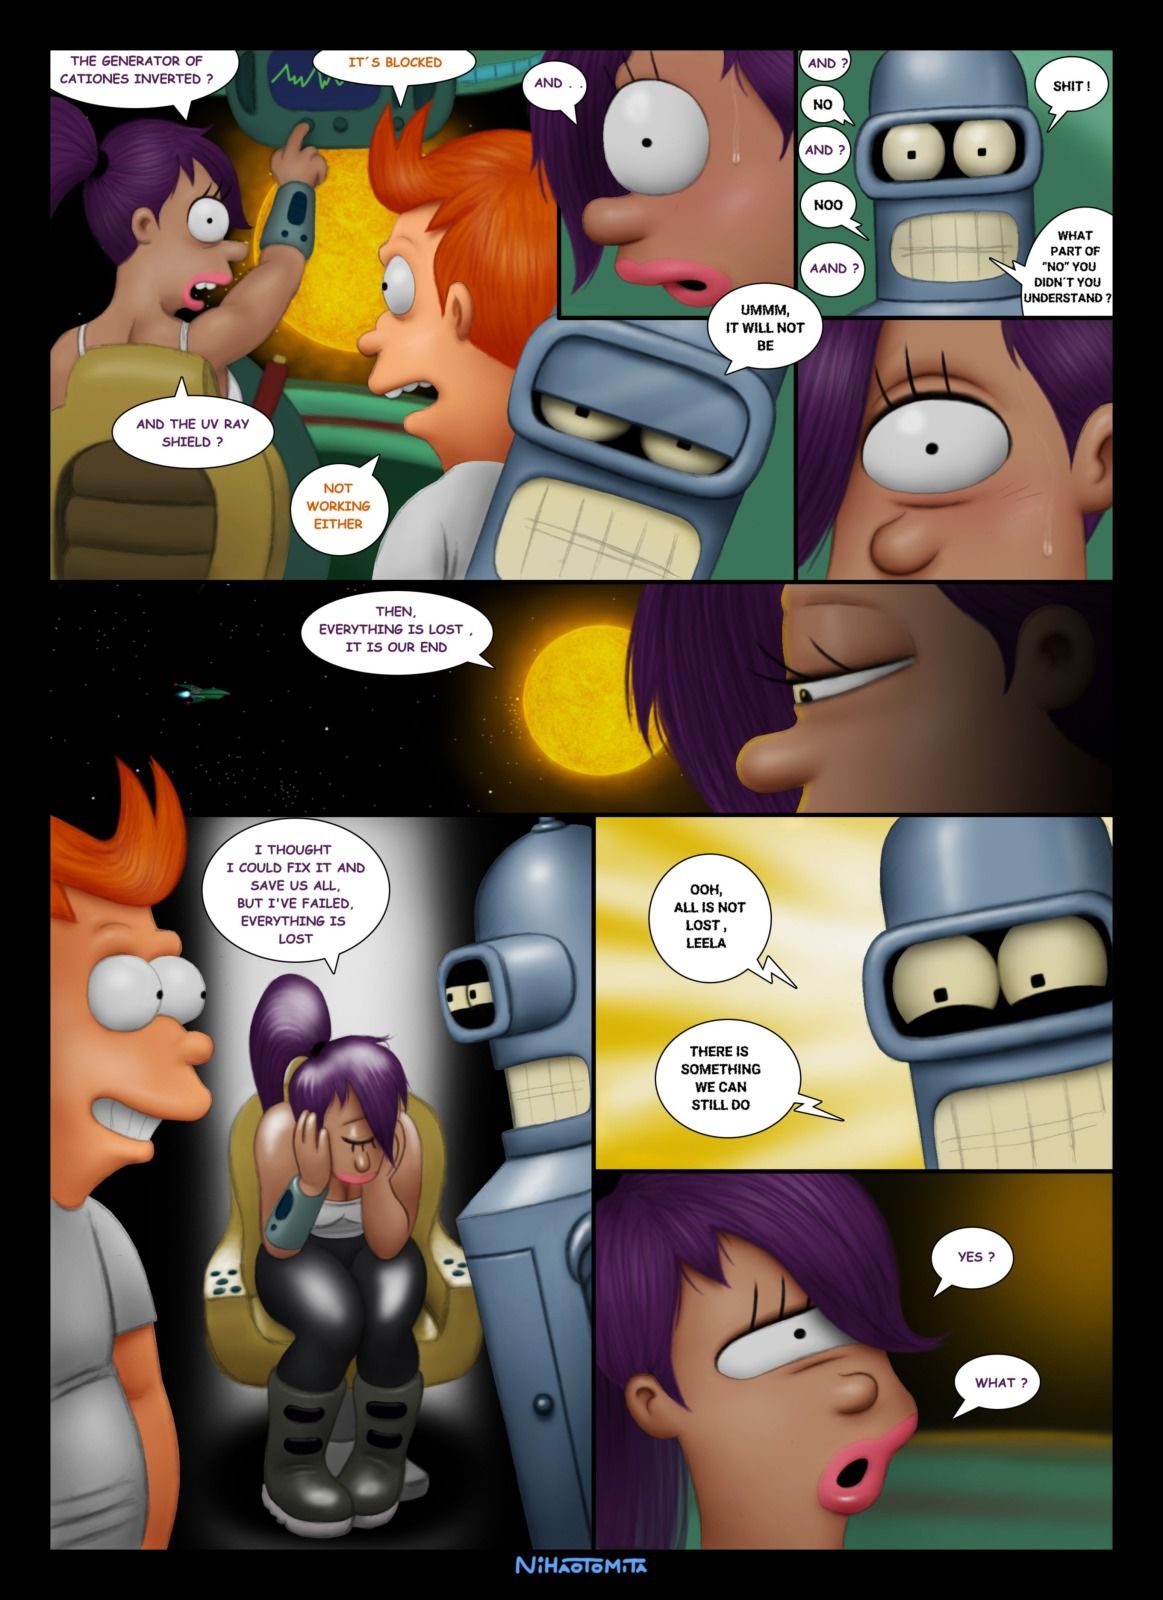 [nihaotomita] Futurama - An indecent proposition page 4